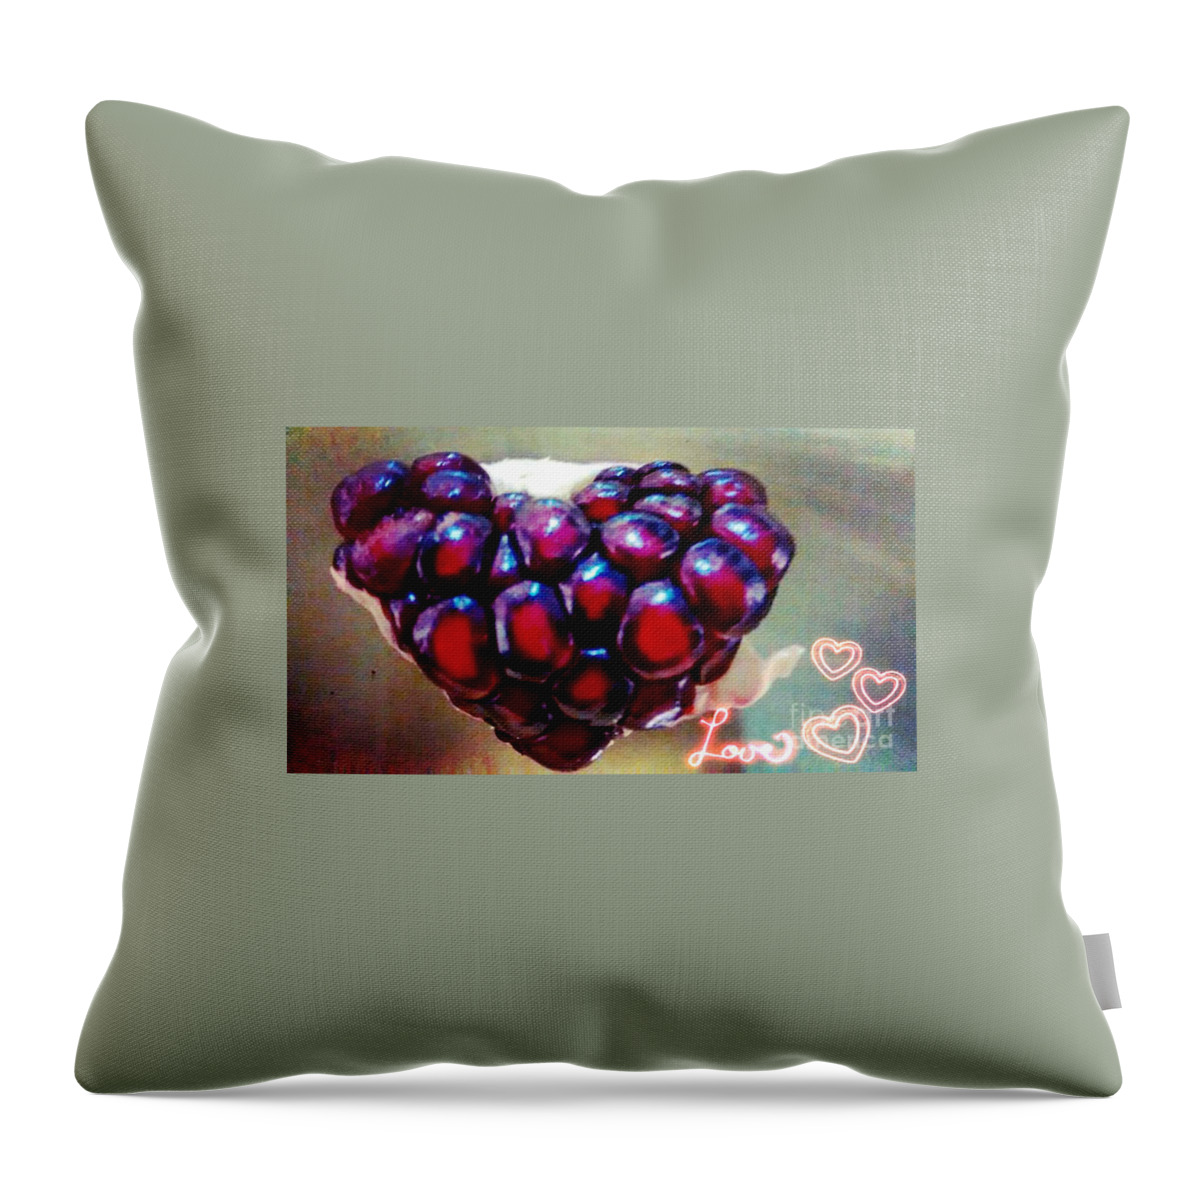 Heart Throw Pillow featuring the digital art Pomegranate Heart by Genevieve Esson